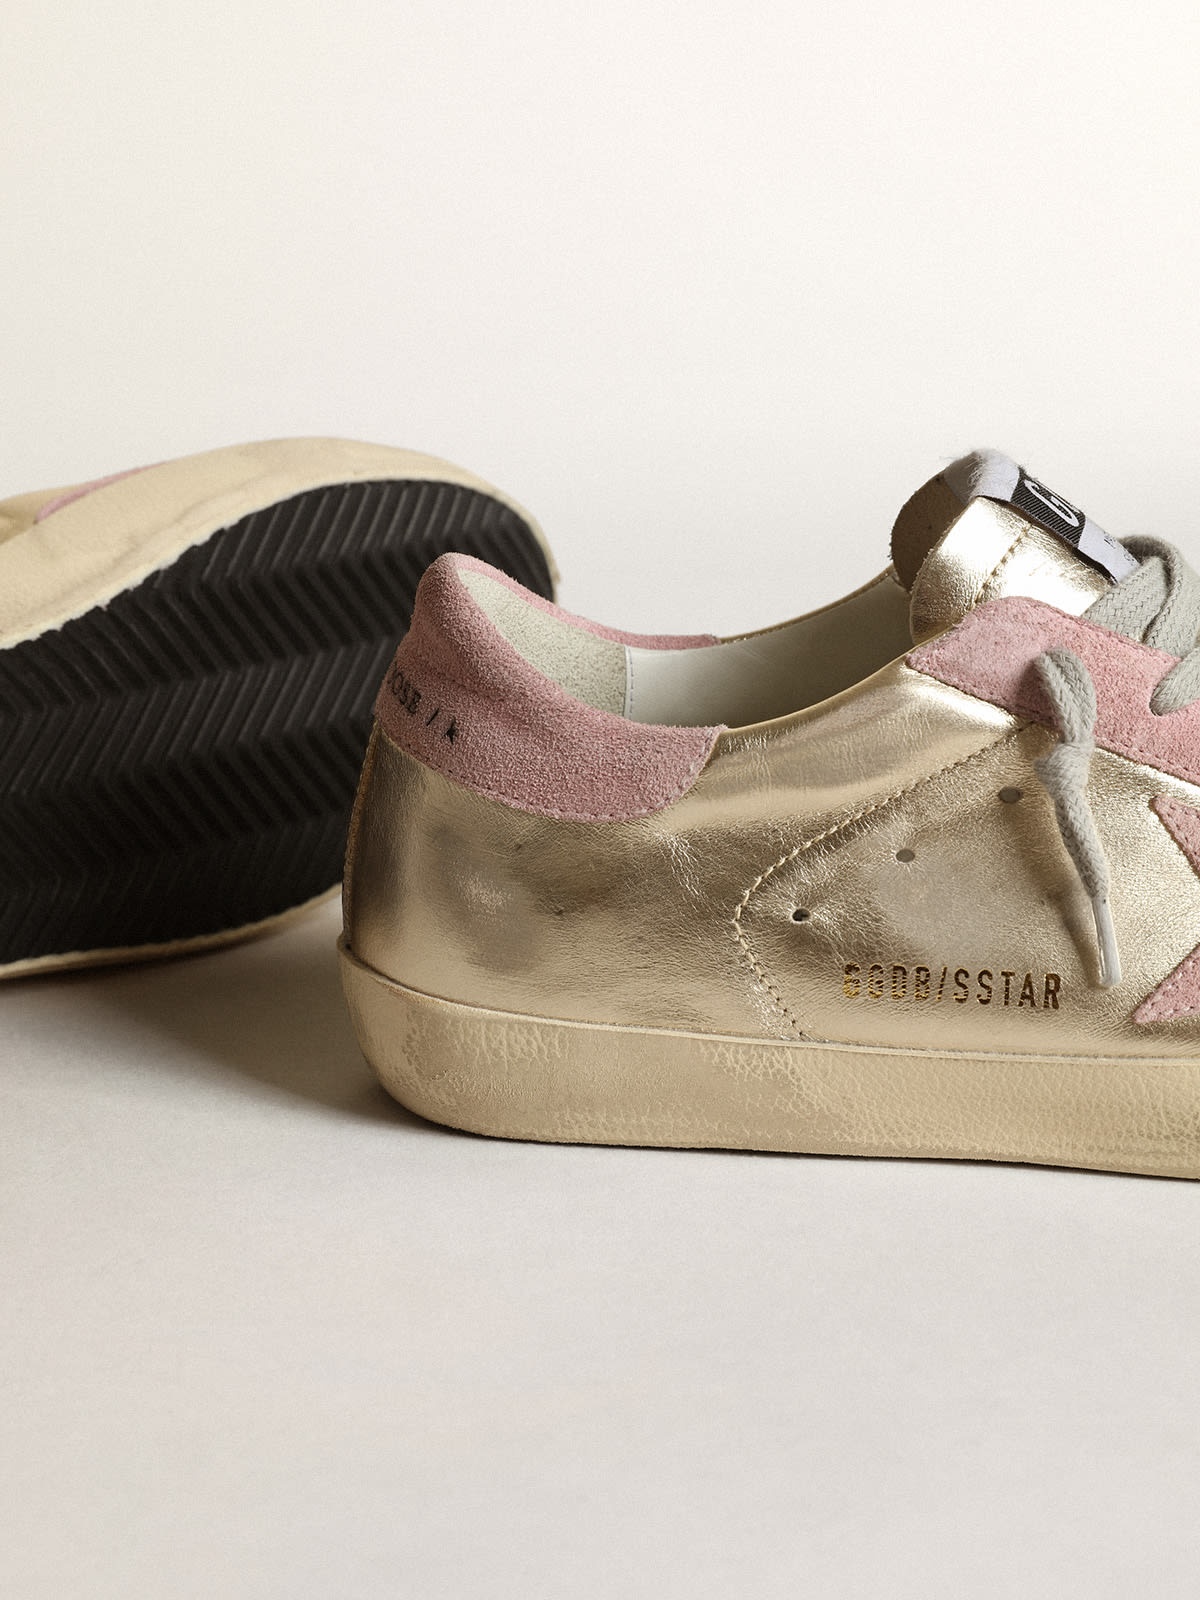 Super-Star LTD sneakers in platinum metallic leather with pink suede star and heel tab - 3